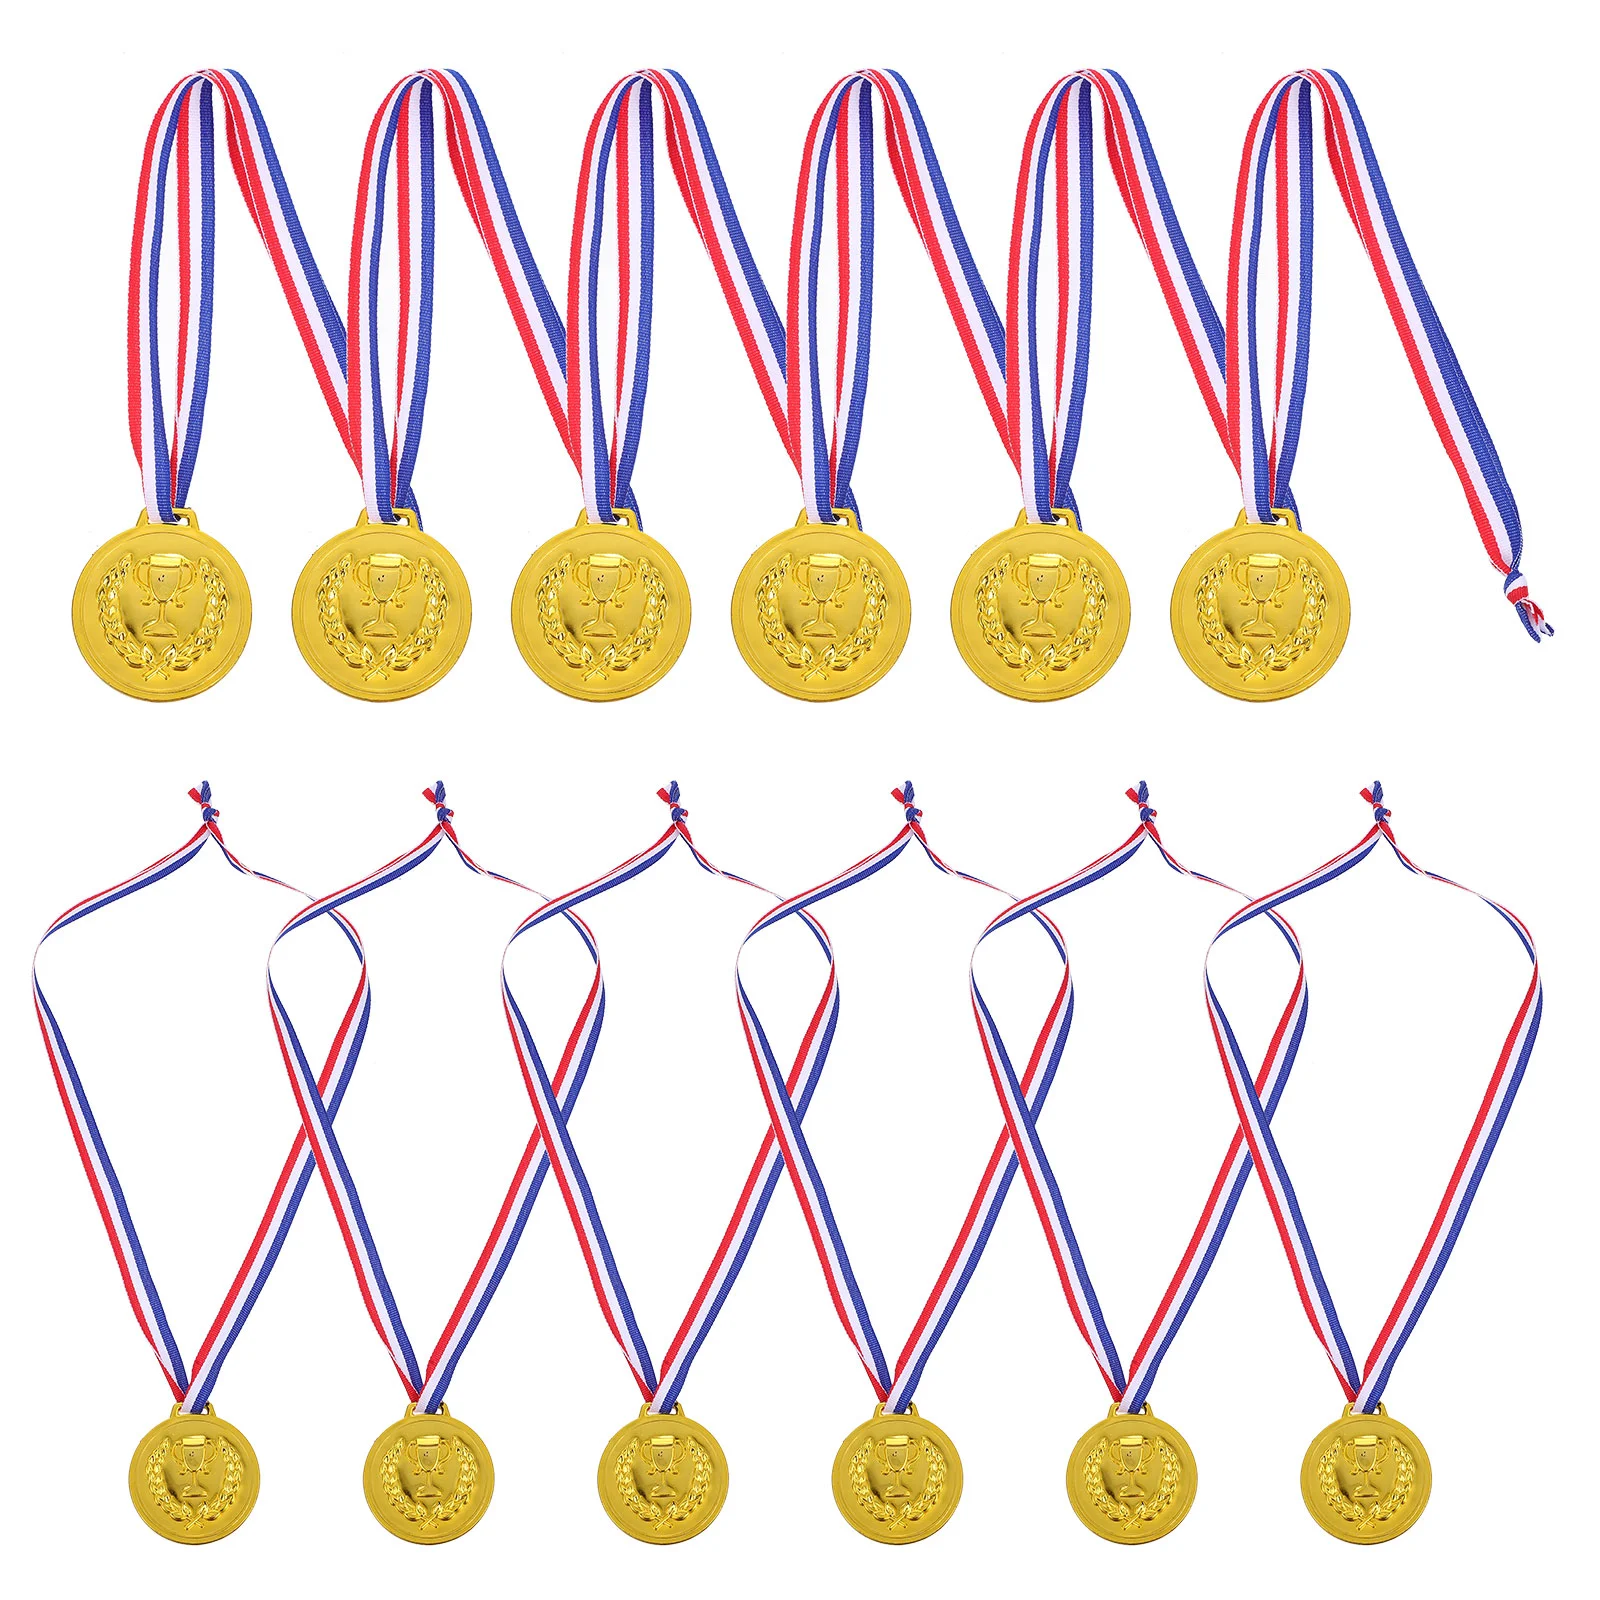 

12 Pcs Children's Medal Toys Home Decor Kids Award Medals The Sports for Awards Cloth Competition